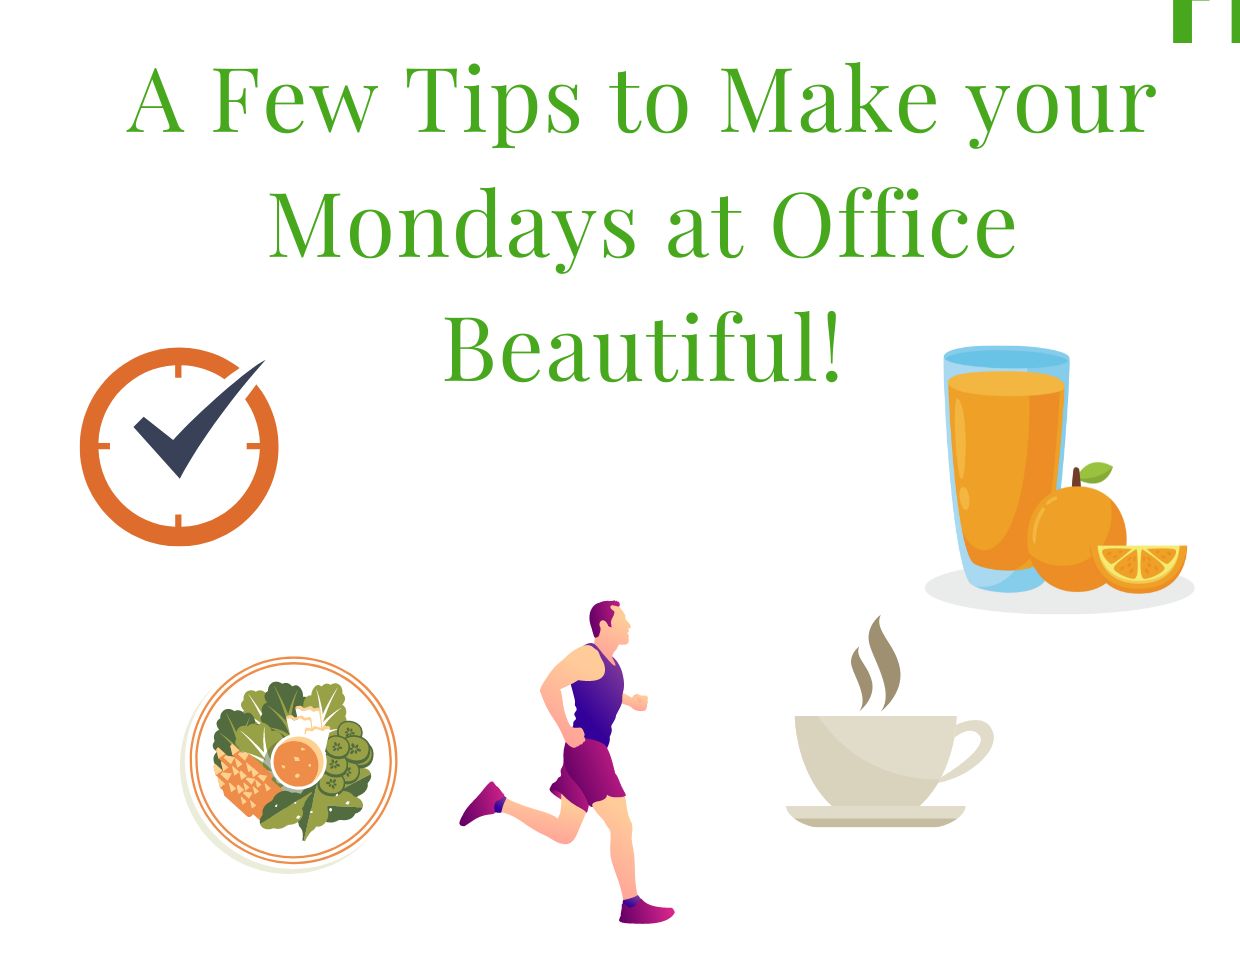 tips-make-monday-office-beautiful-time-food-exercise-breakfast-juice